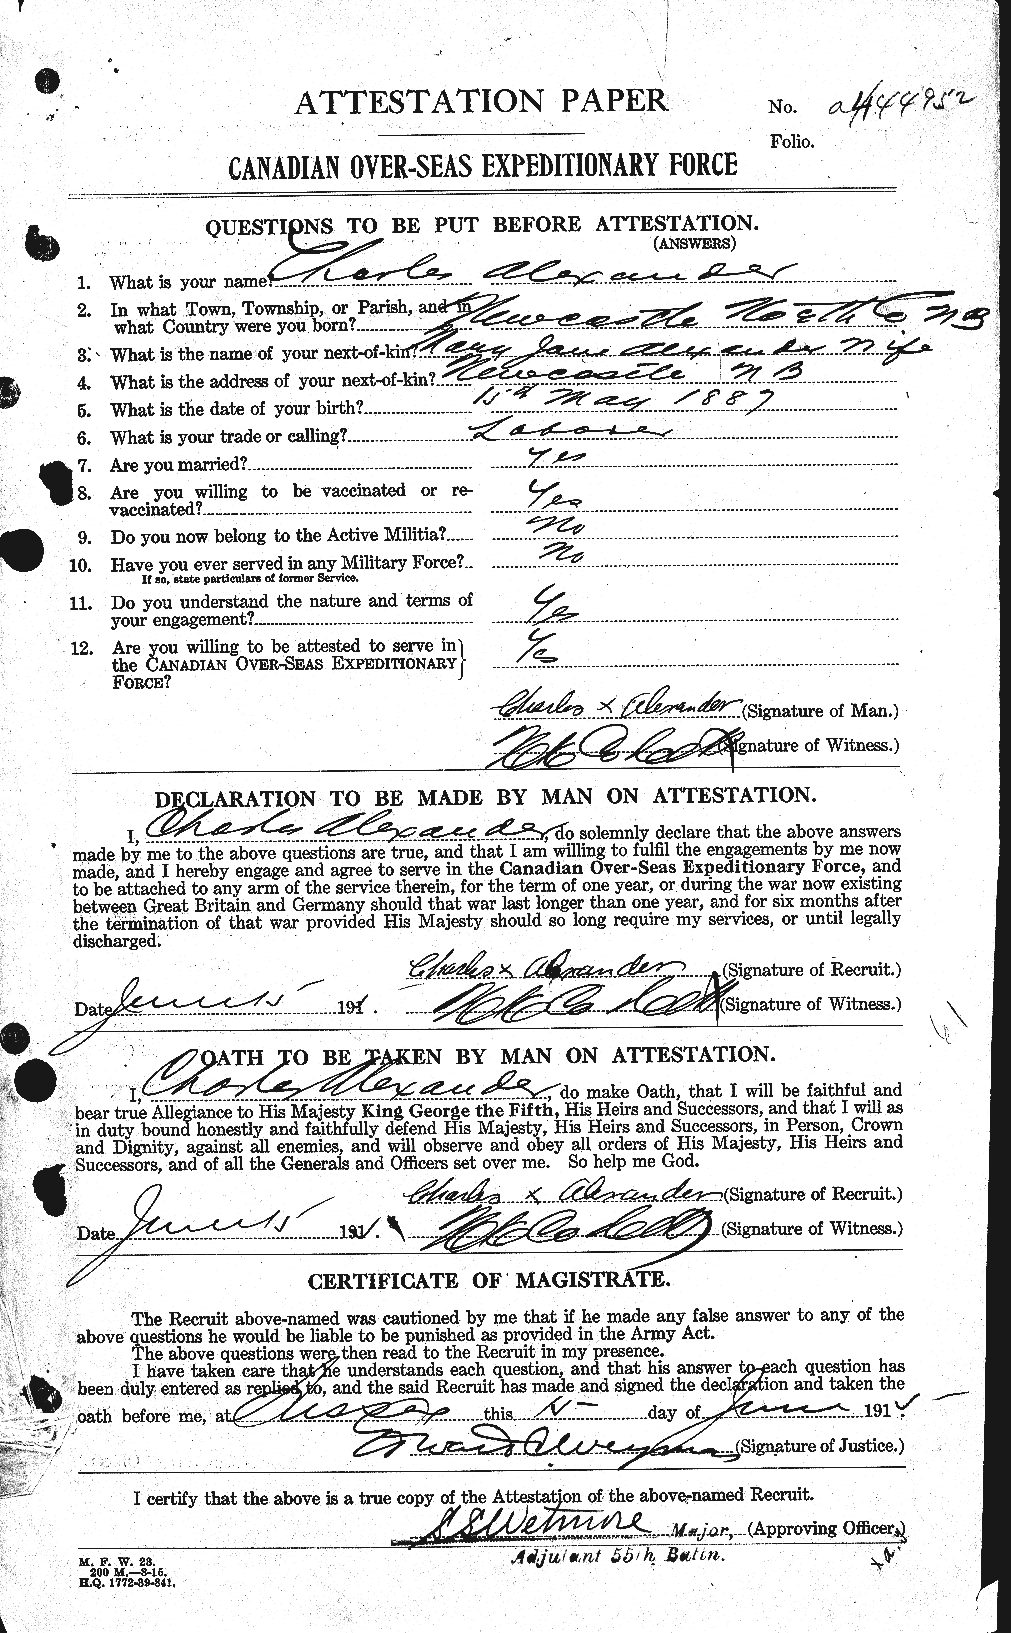 Personnel Records of the First World War - CEF 203934a